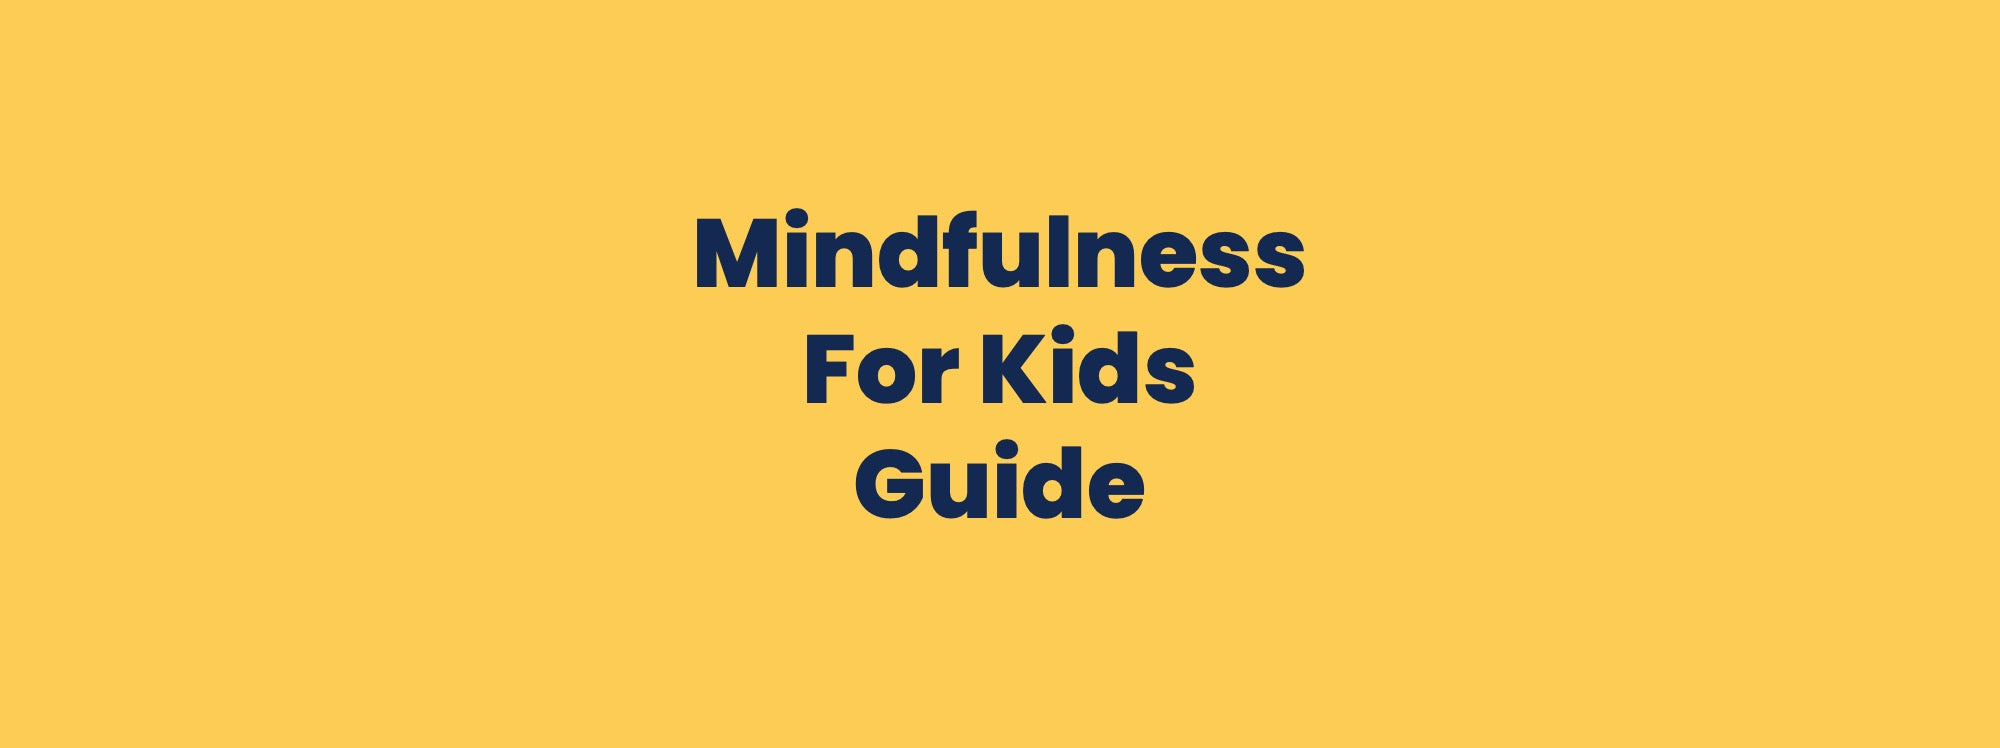 Mindfulness For Kids Guide